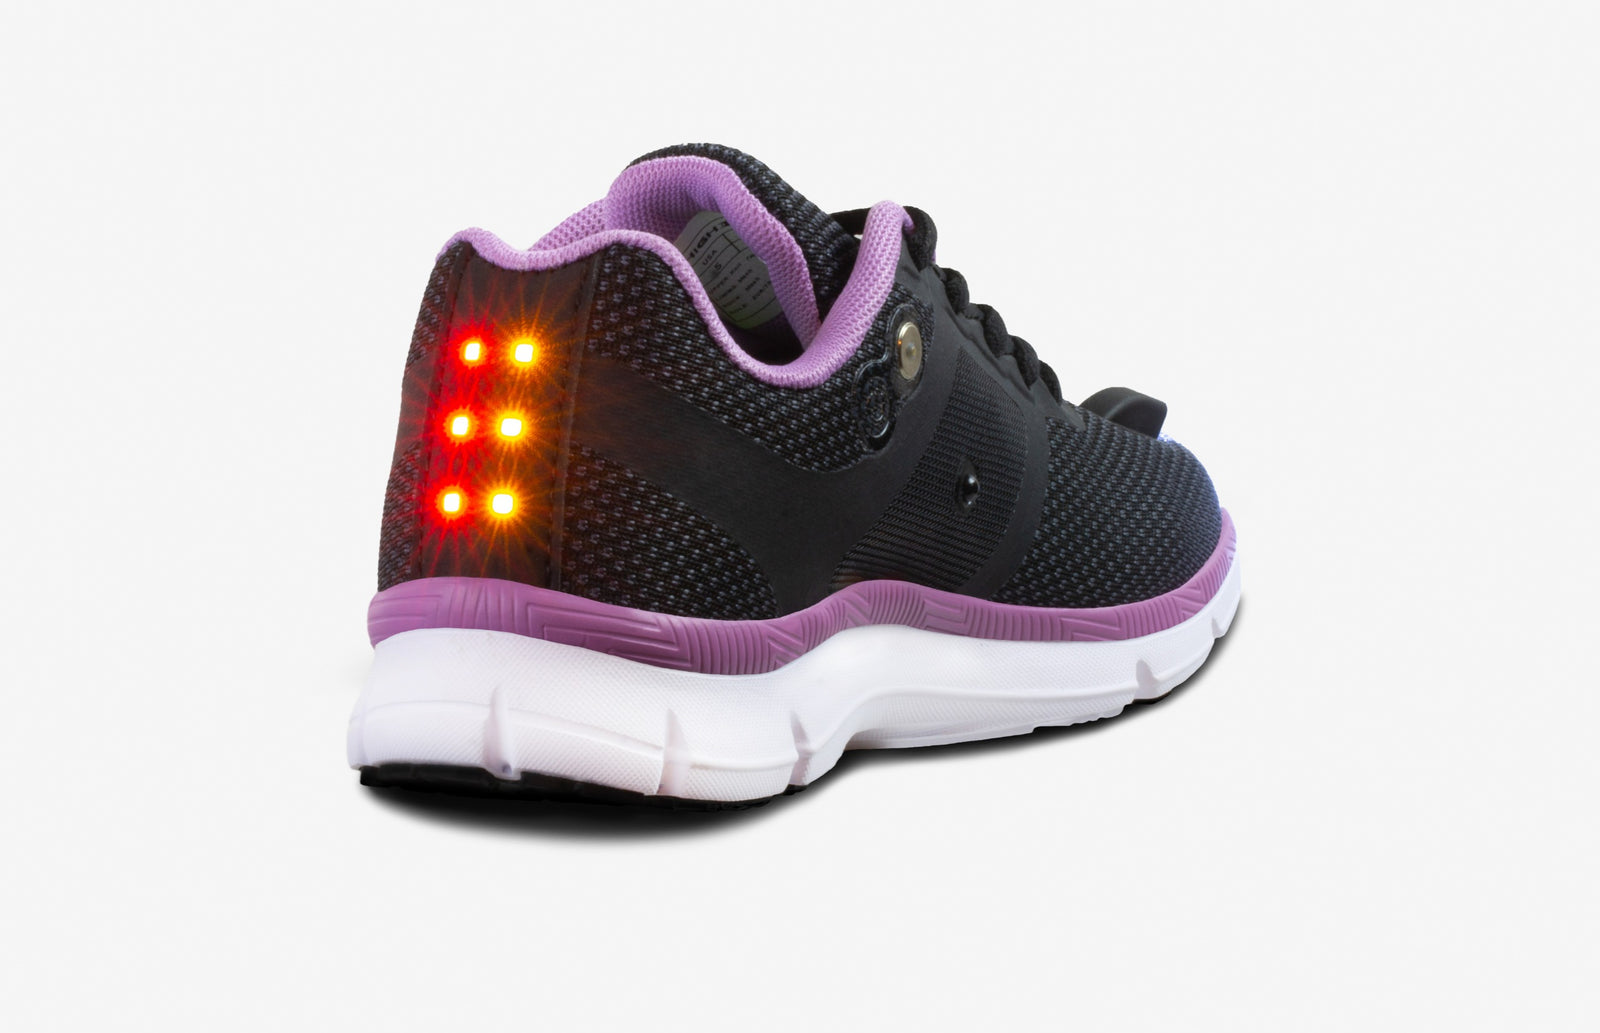 Women's Night Runner Shoes With Built-in Safety Lights